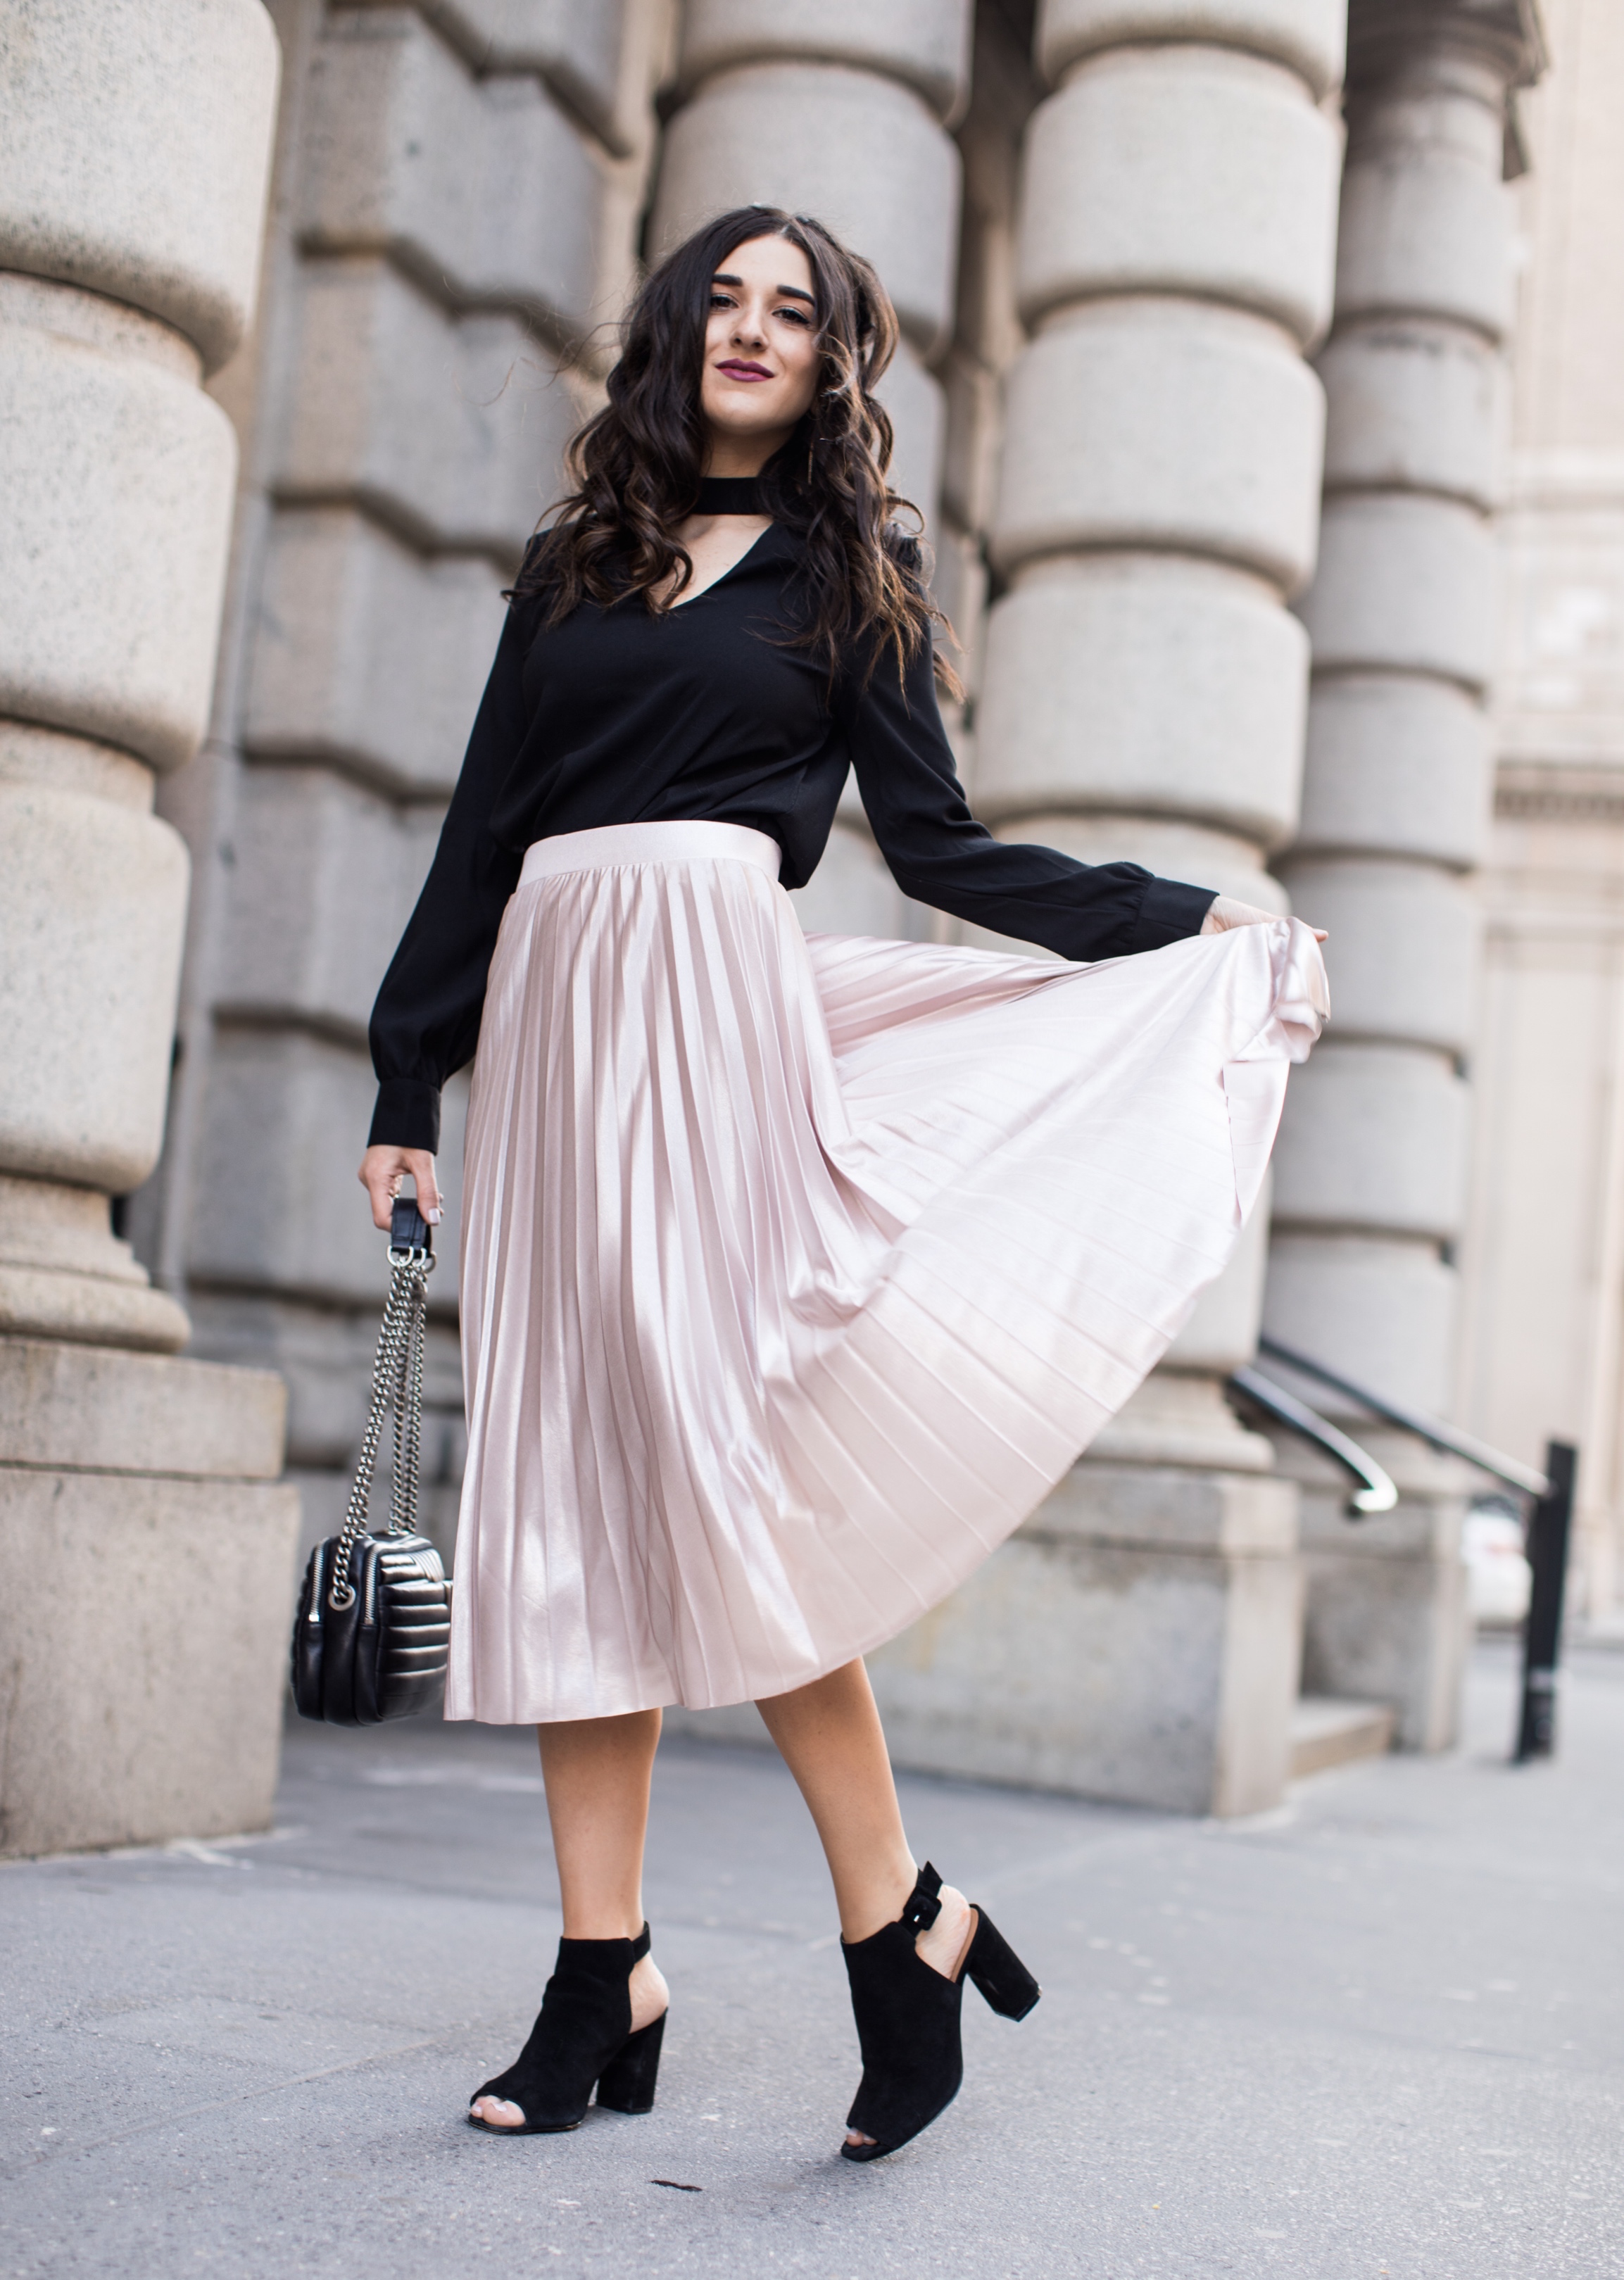 Metallic Midi Skirt Black Cutout Top How I Pack In A Carry On Esther Santer Fashion Blog NYC Street Style Blogger Outfit OOTD Trendy Feminine Girly Spring Hairstyle Waves Travel Tips Honeymoon Photshoot Pose Wearing Shop Peep Toe Booties Henri Bendel.jpg